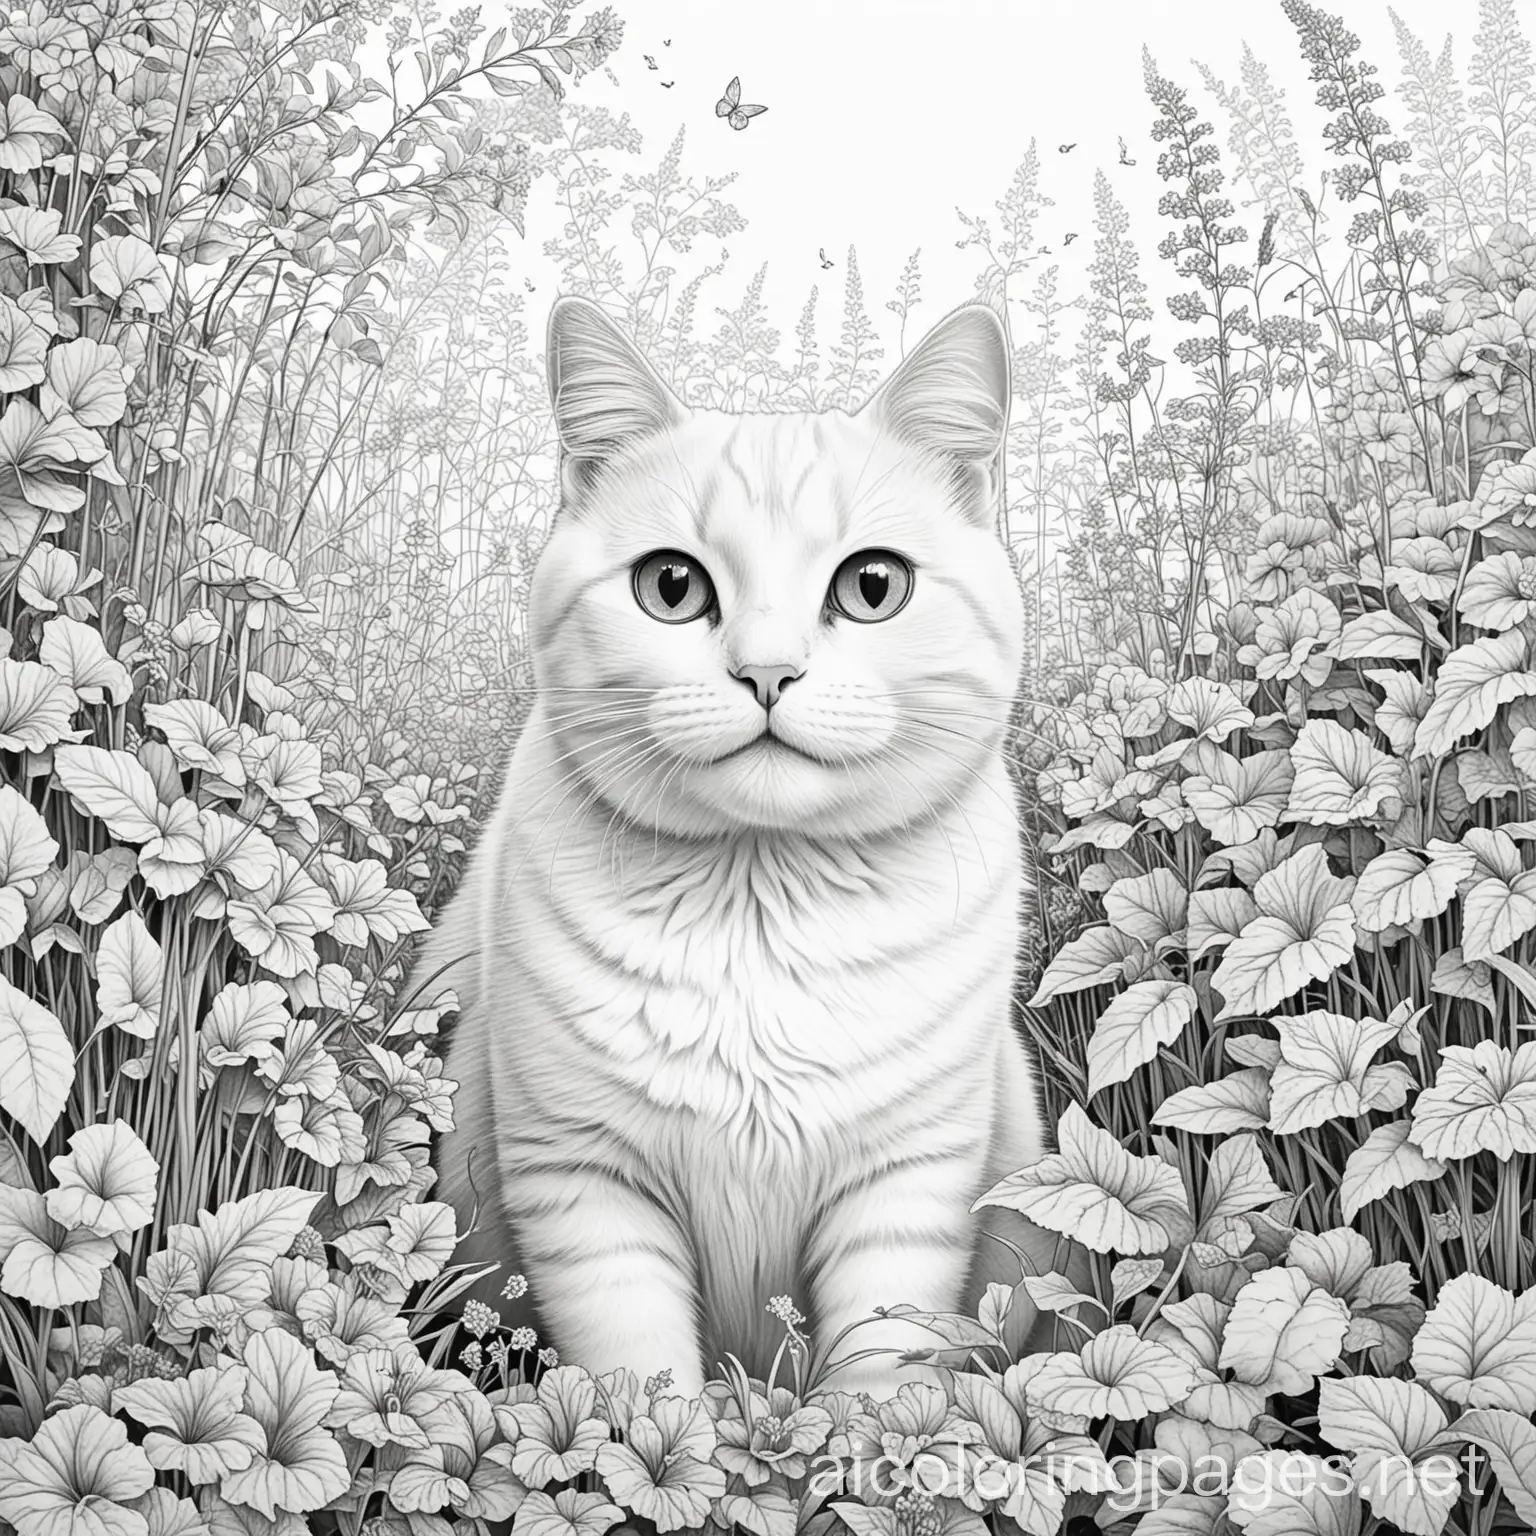 Happy-Cat-in-the-Garden-Coloring-Page-with-Ample-White-Space